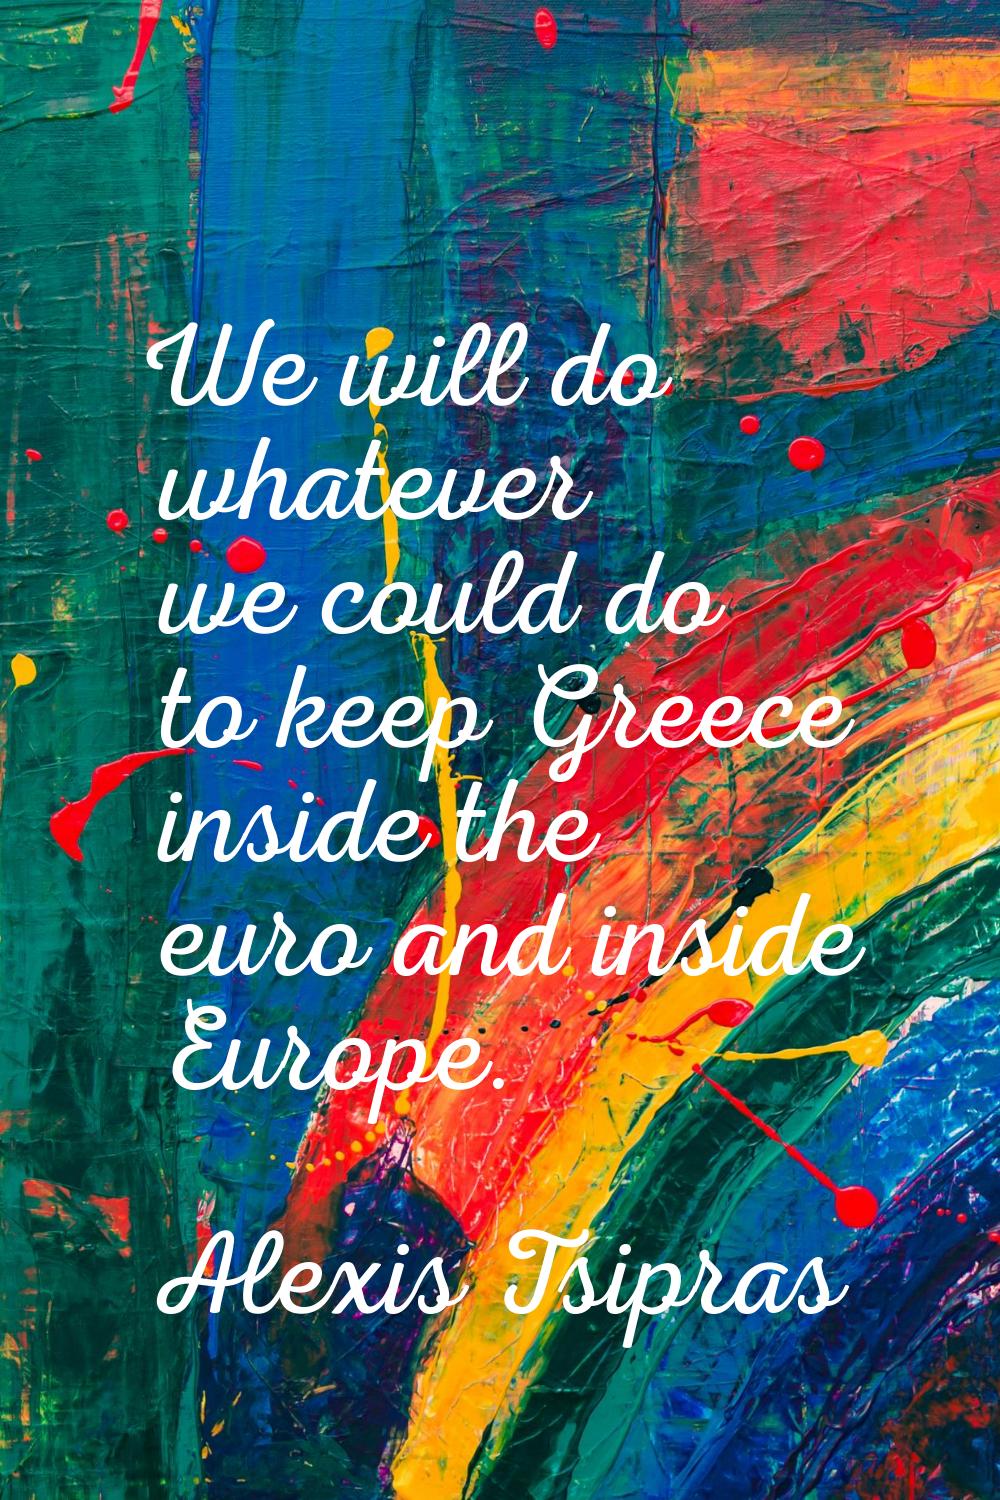 We will do whatever we could do to keep Greece inside the euro and inside Europe.